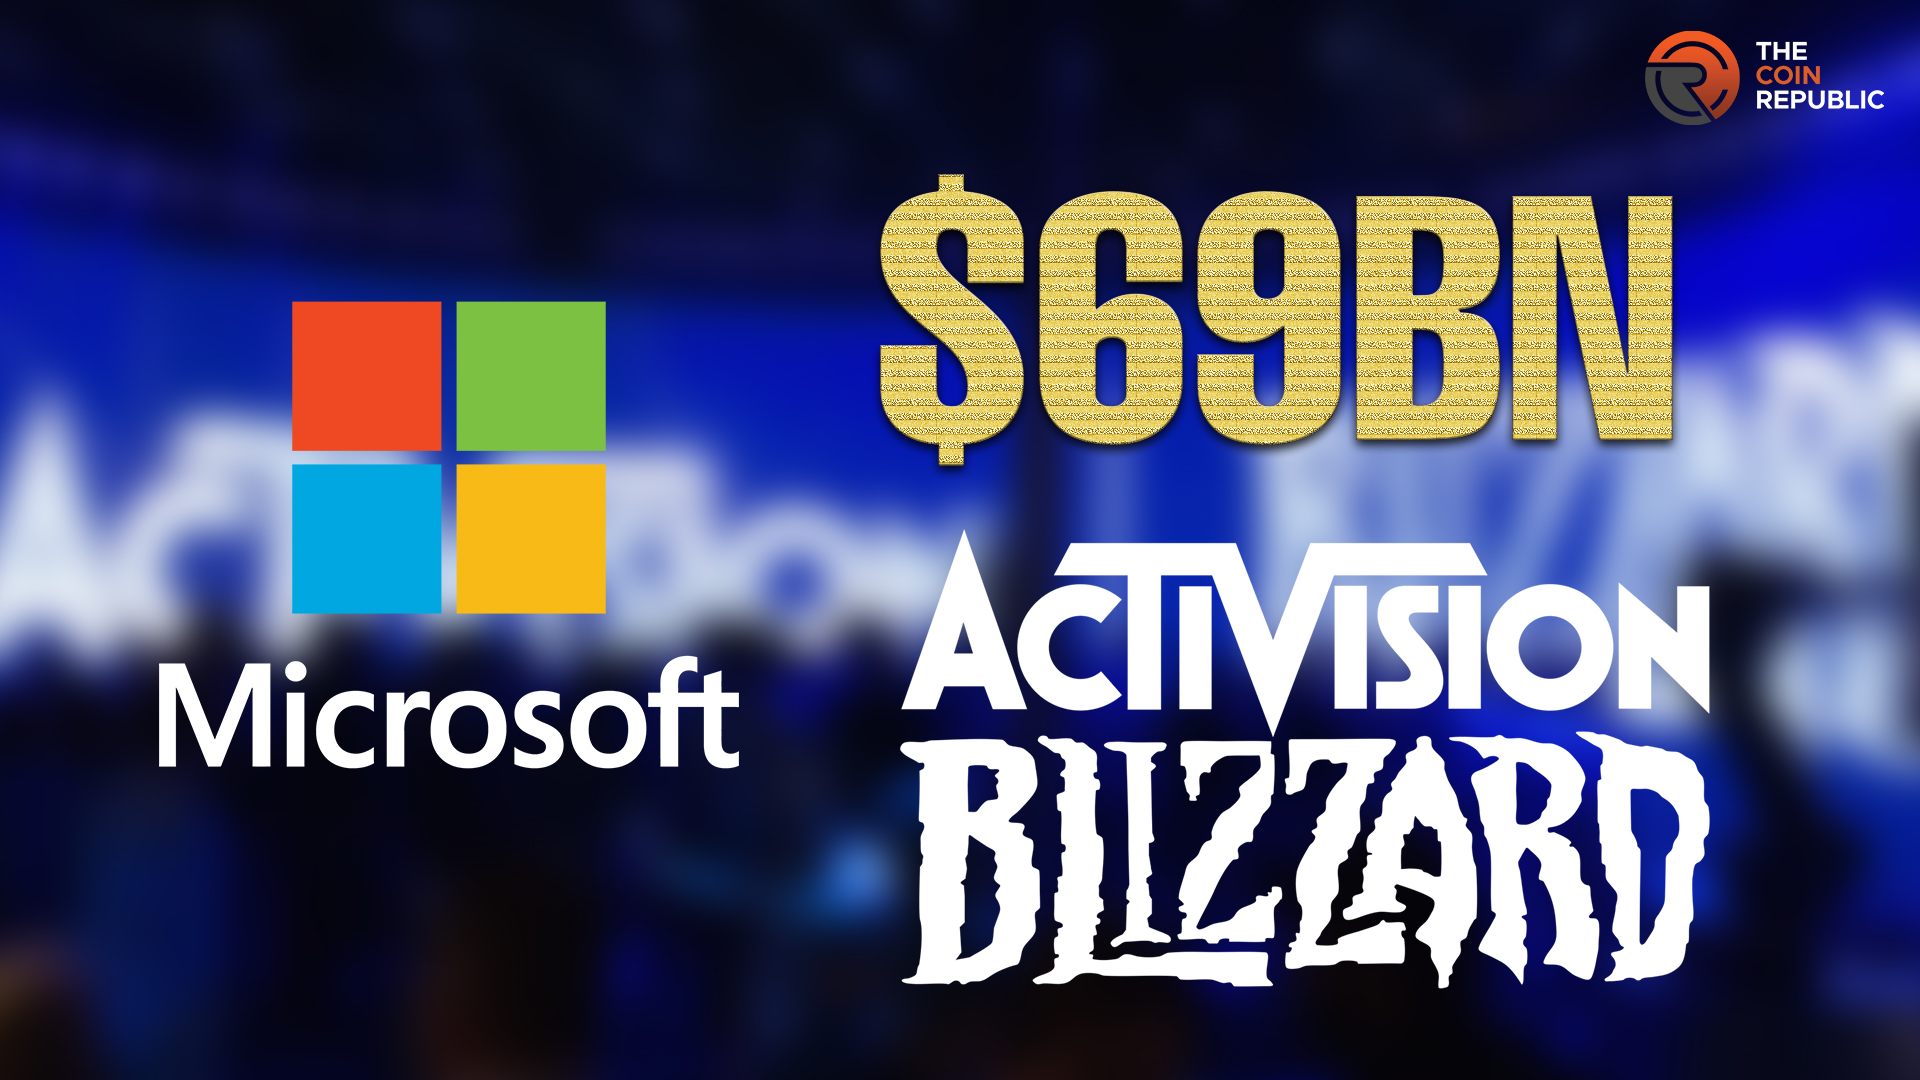 Historic Activision Blizzard Deal Might Boost MSFT Stock